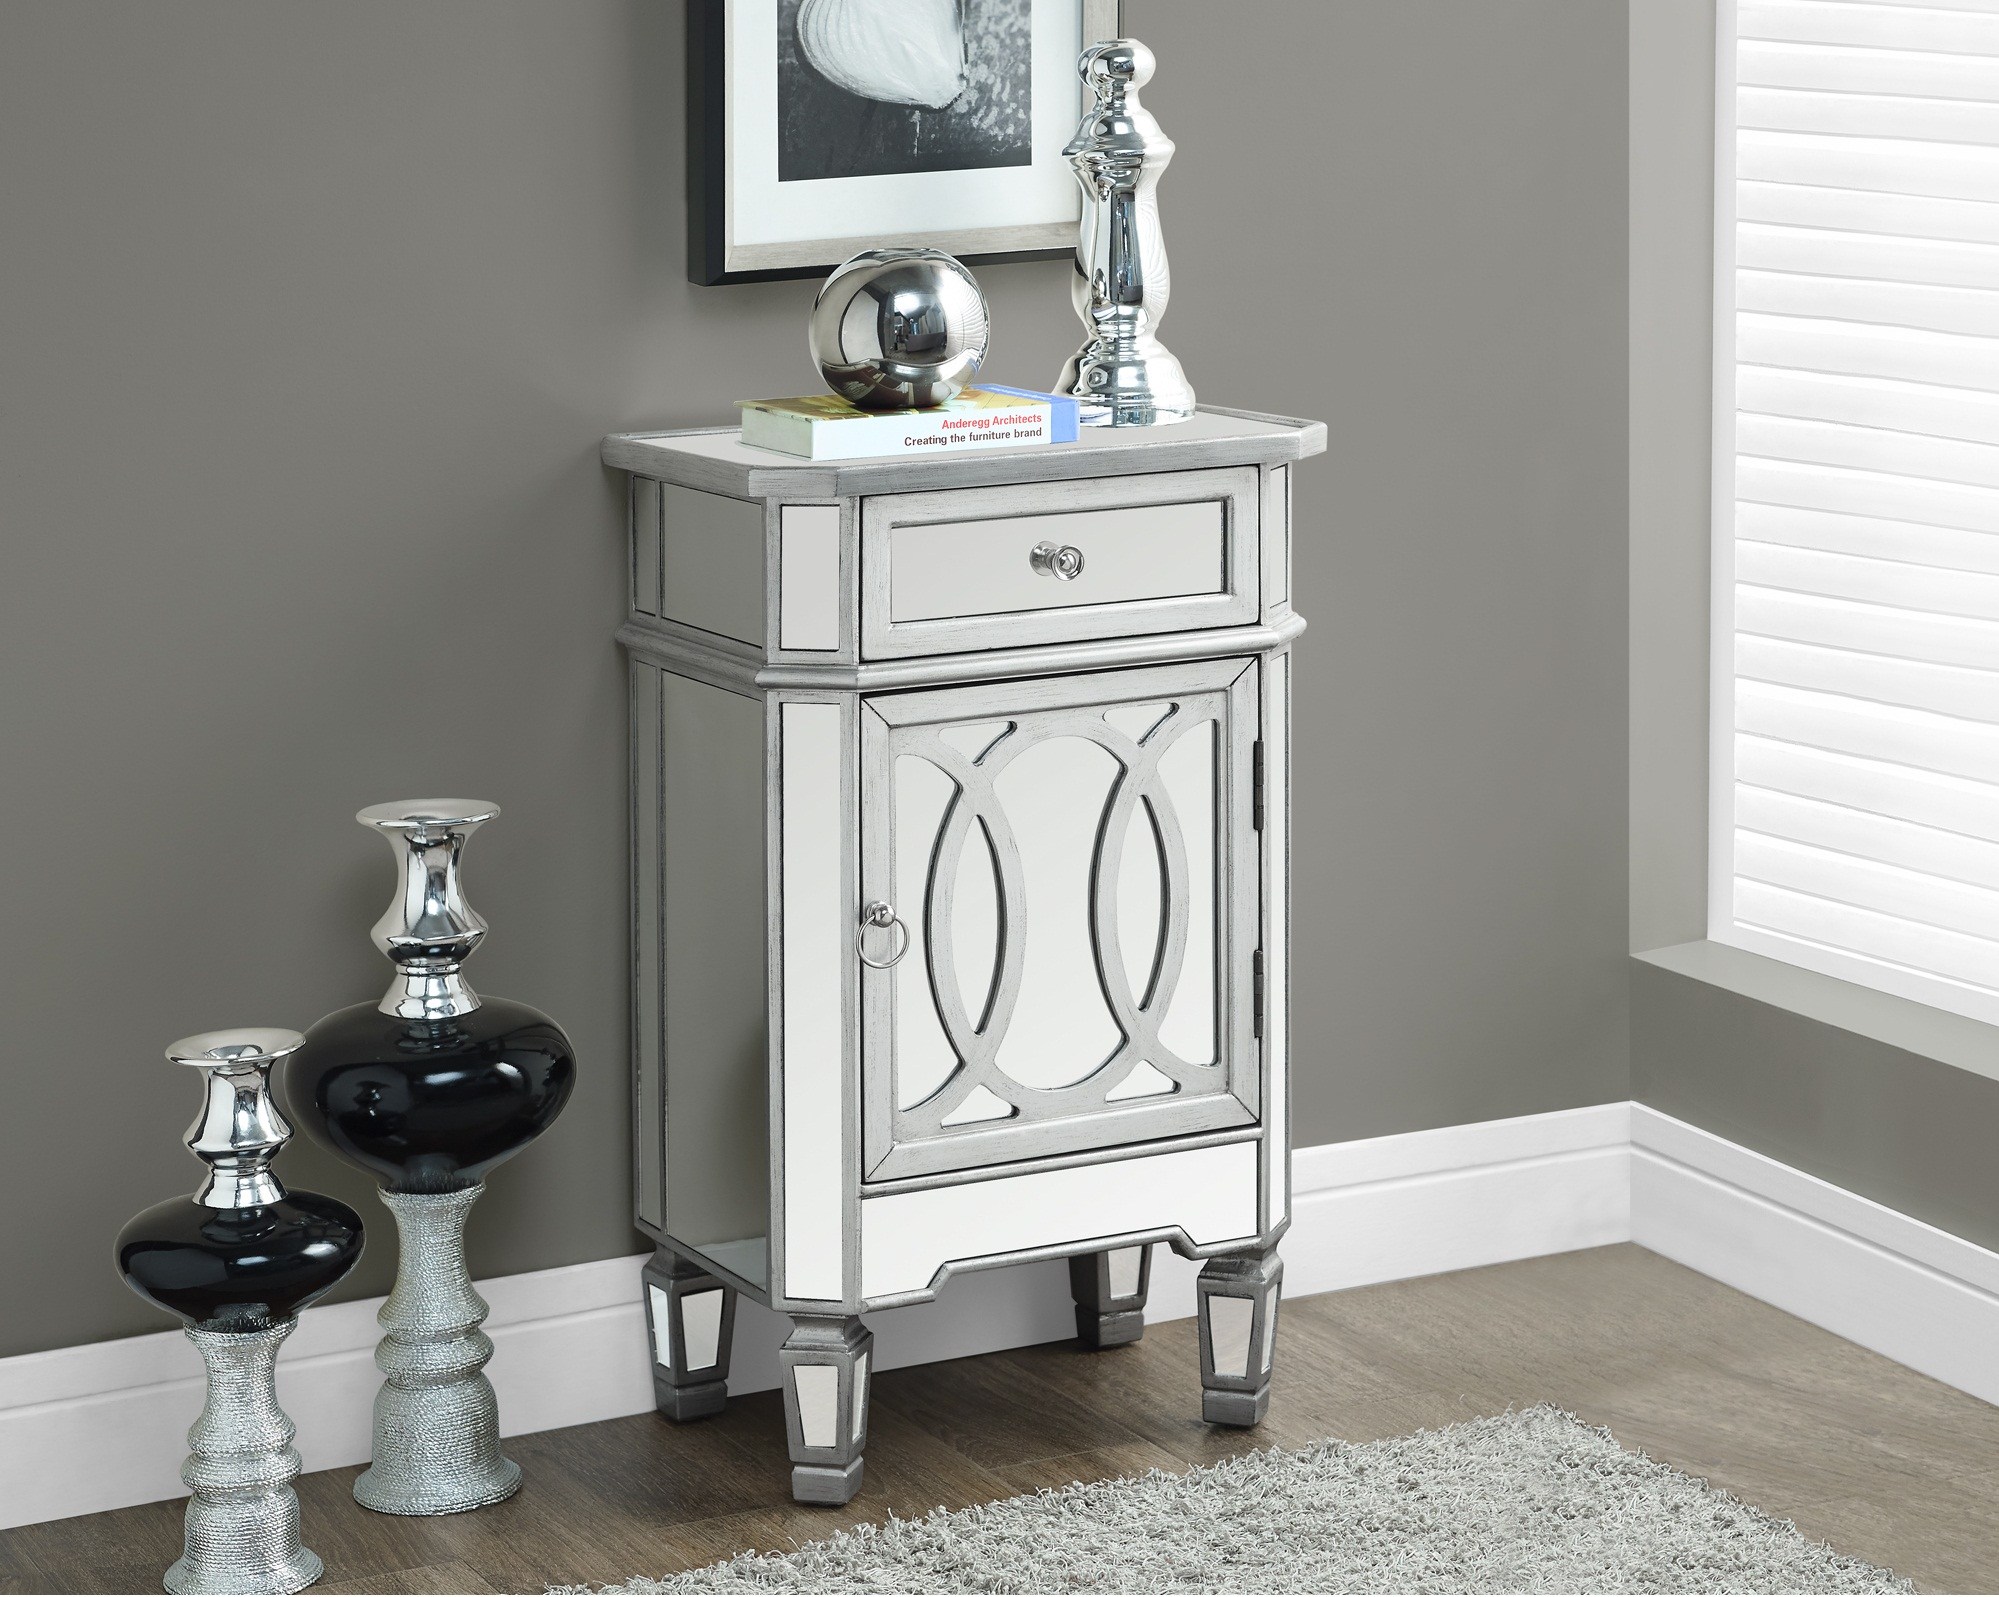 corner cabinet door lock painted silver color room ideas end drawers coffee storage bedroom mirror wood console cube small mirrored accent table drawer with fullsize glass legs